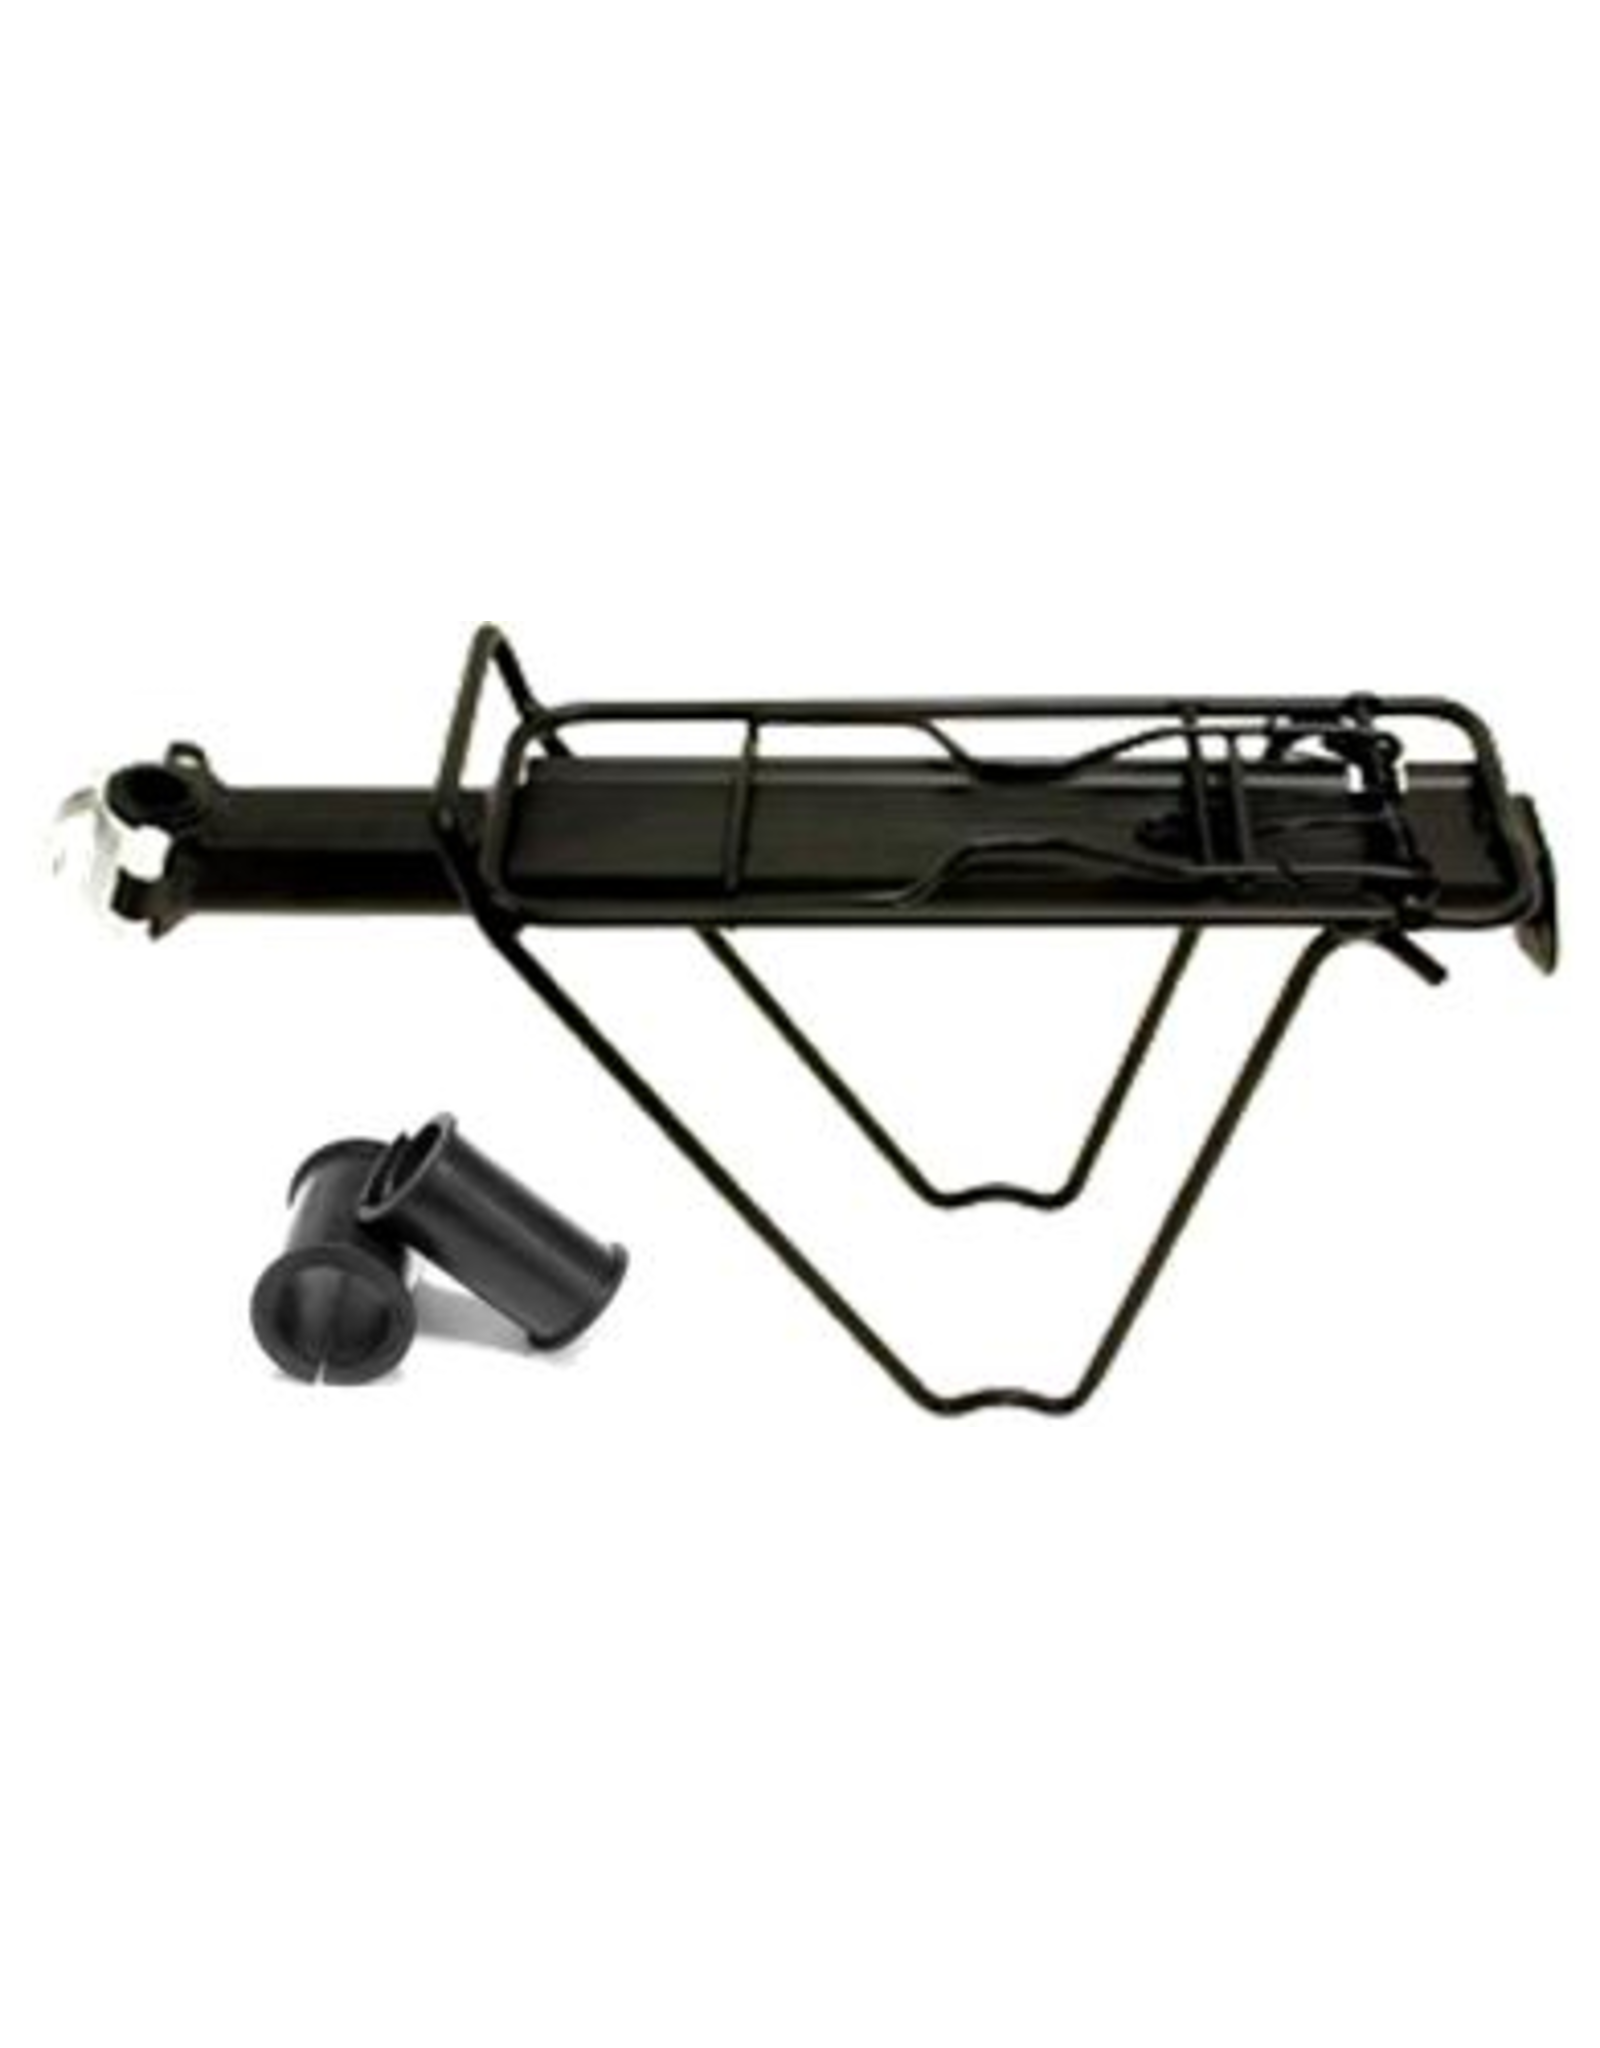 TOUR SERIES TOUR SERIES SEAT POST MOUNTED QR CARRIER RACK WITH BAG STAYS & SPRING BOW ALLOY BLACK